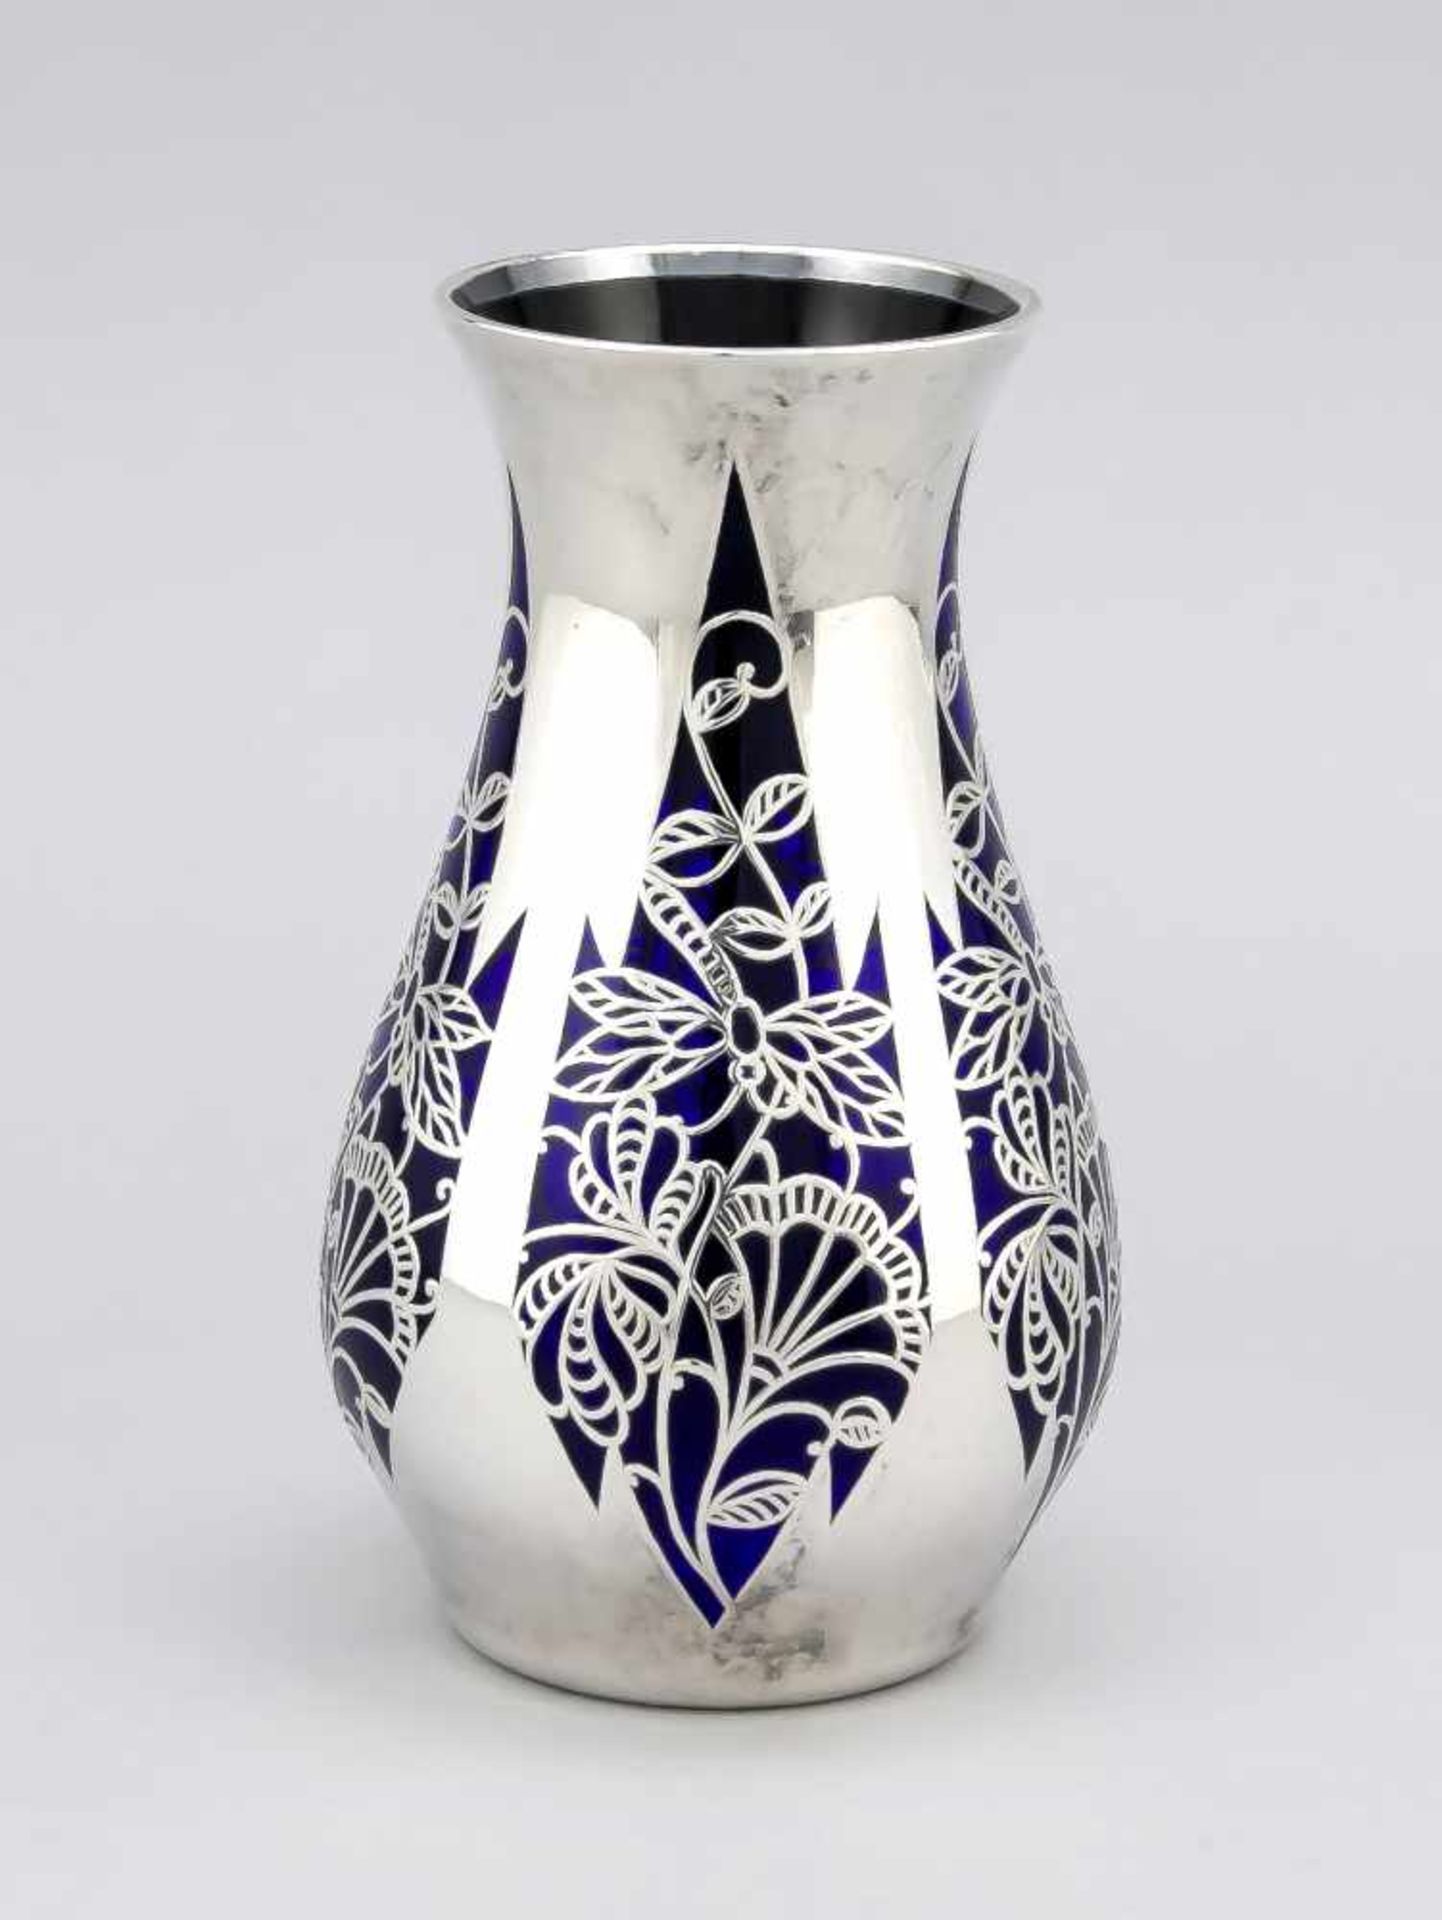 Vase, 20th century, round base, bulgy body, cobalt blue glass with rich floral silver